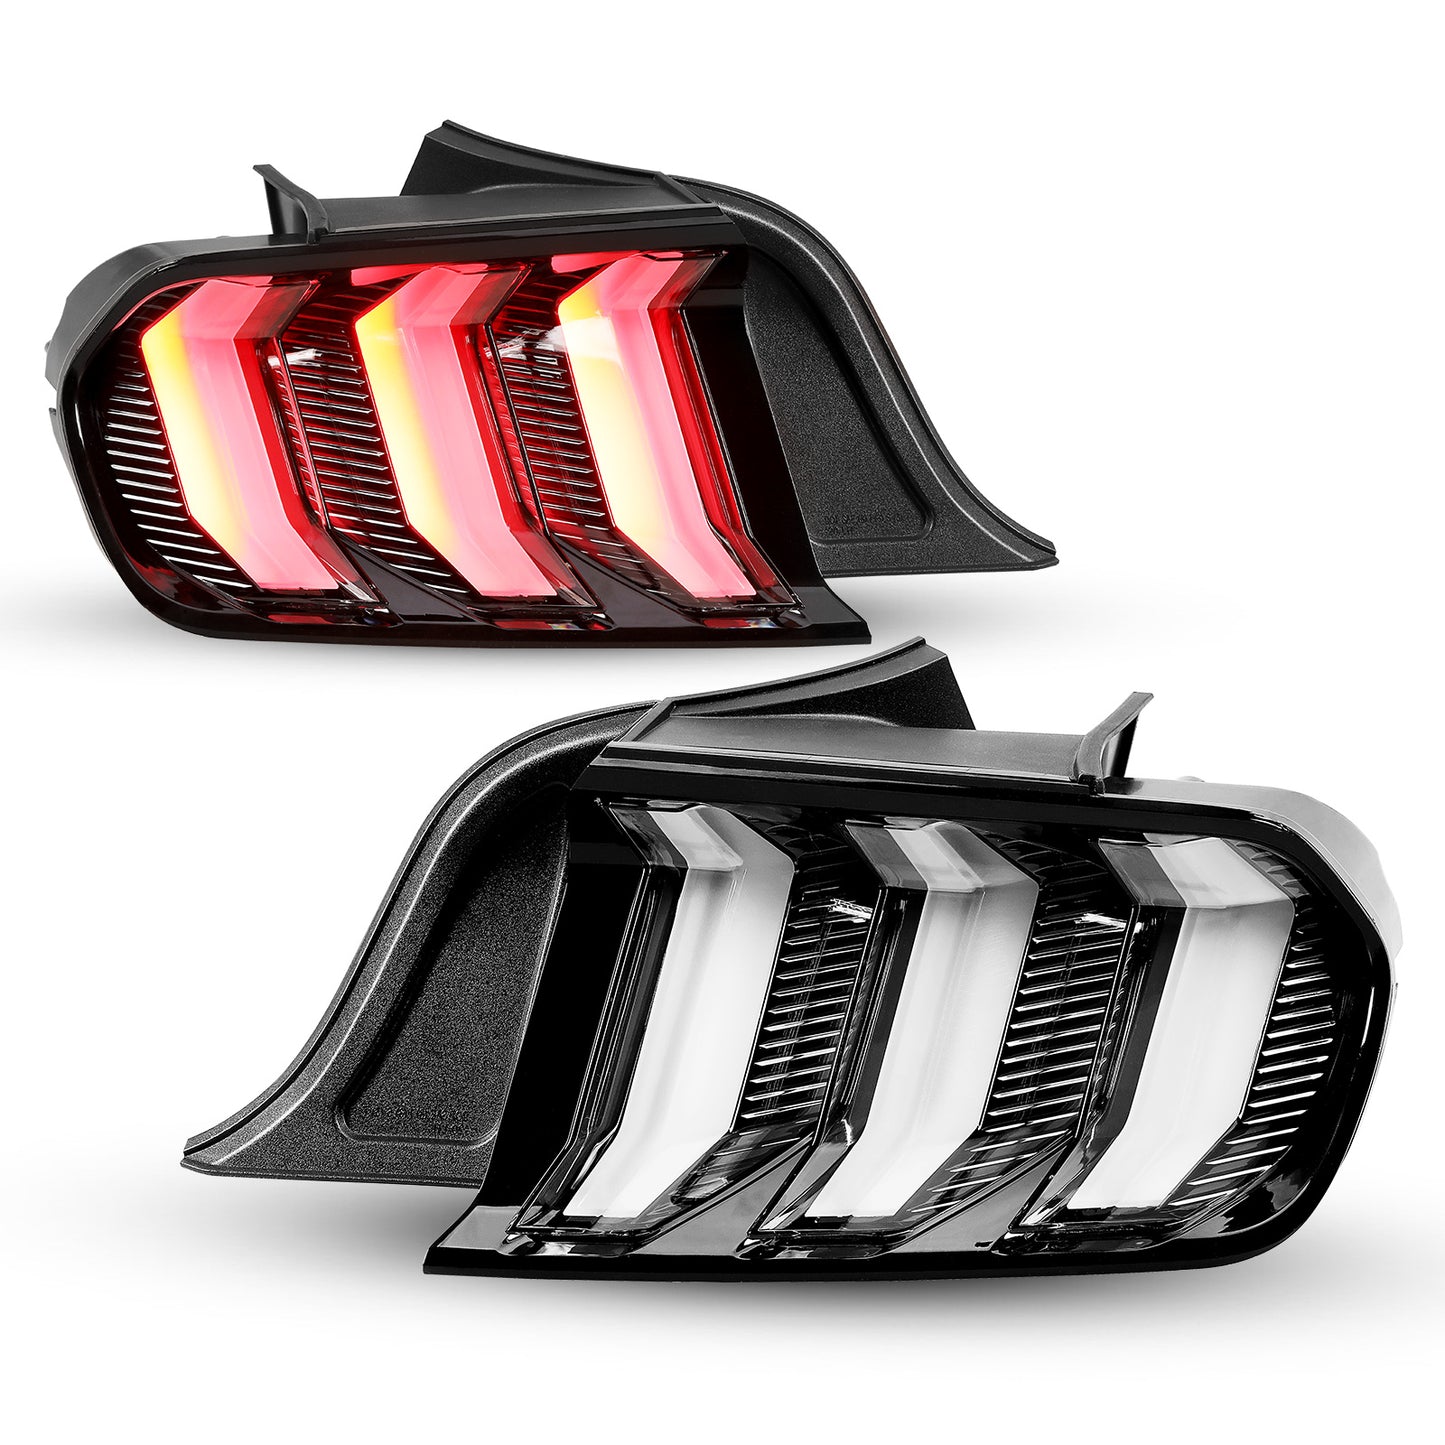 2015-2023 Ford Mustang Coupe & Convertible/2016-2020 Ford Mustang Shelby GT350/2020-2023 Ford Mustang Shelby GT500 LED Tail Lights - Glossy Black/Clear